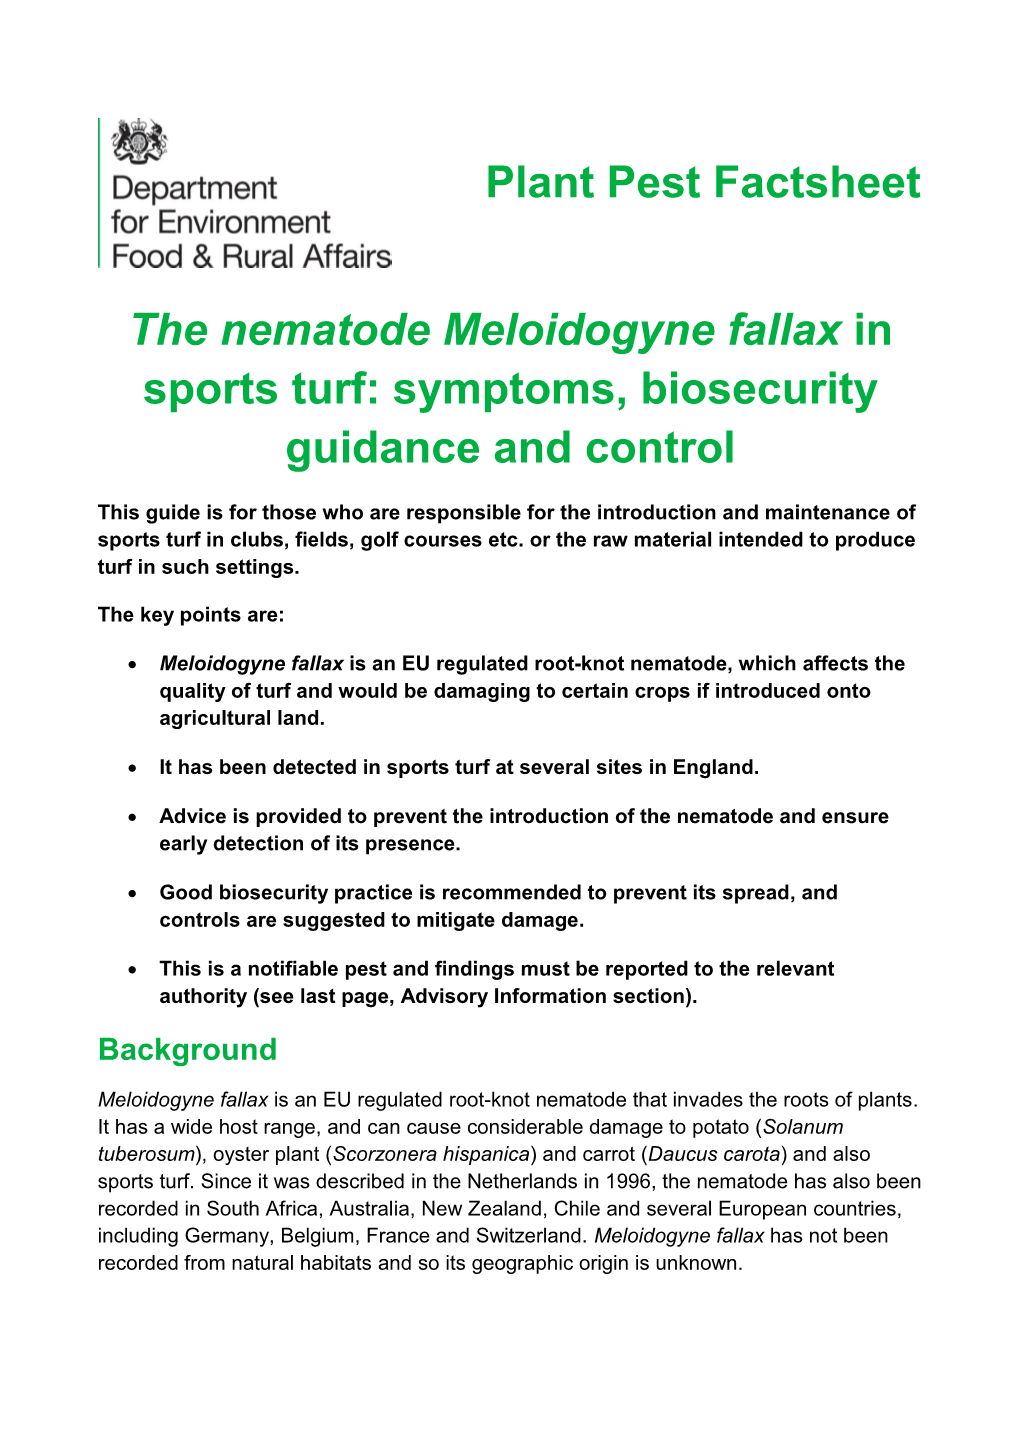 The Nematode Meloidogyne Fallax in Sports Turf: Symptoms, Biosecurity Guidance and Control Plant Pest Factsheet